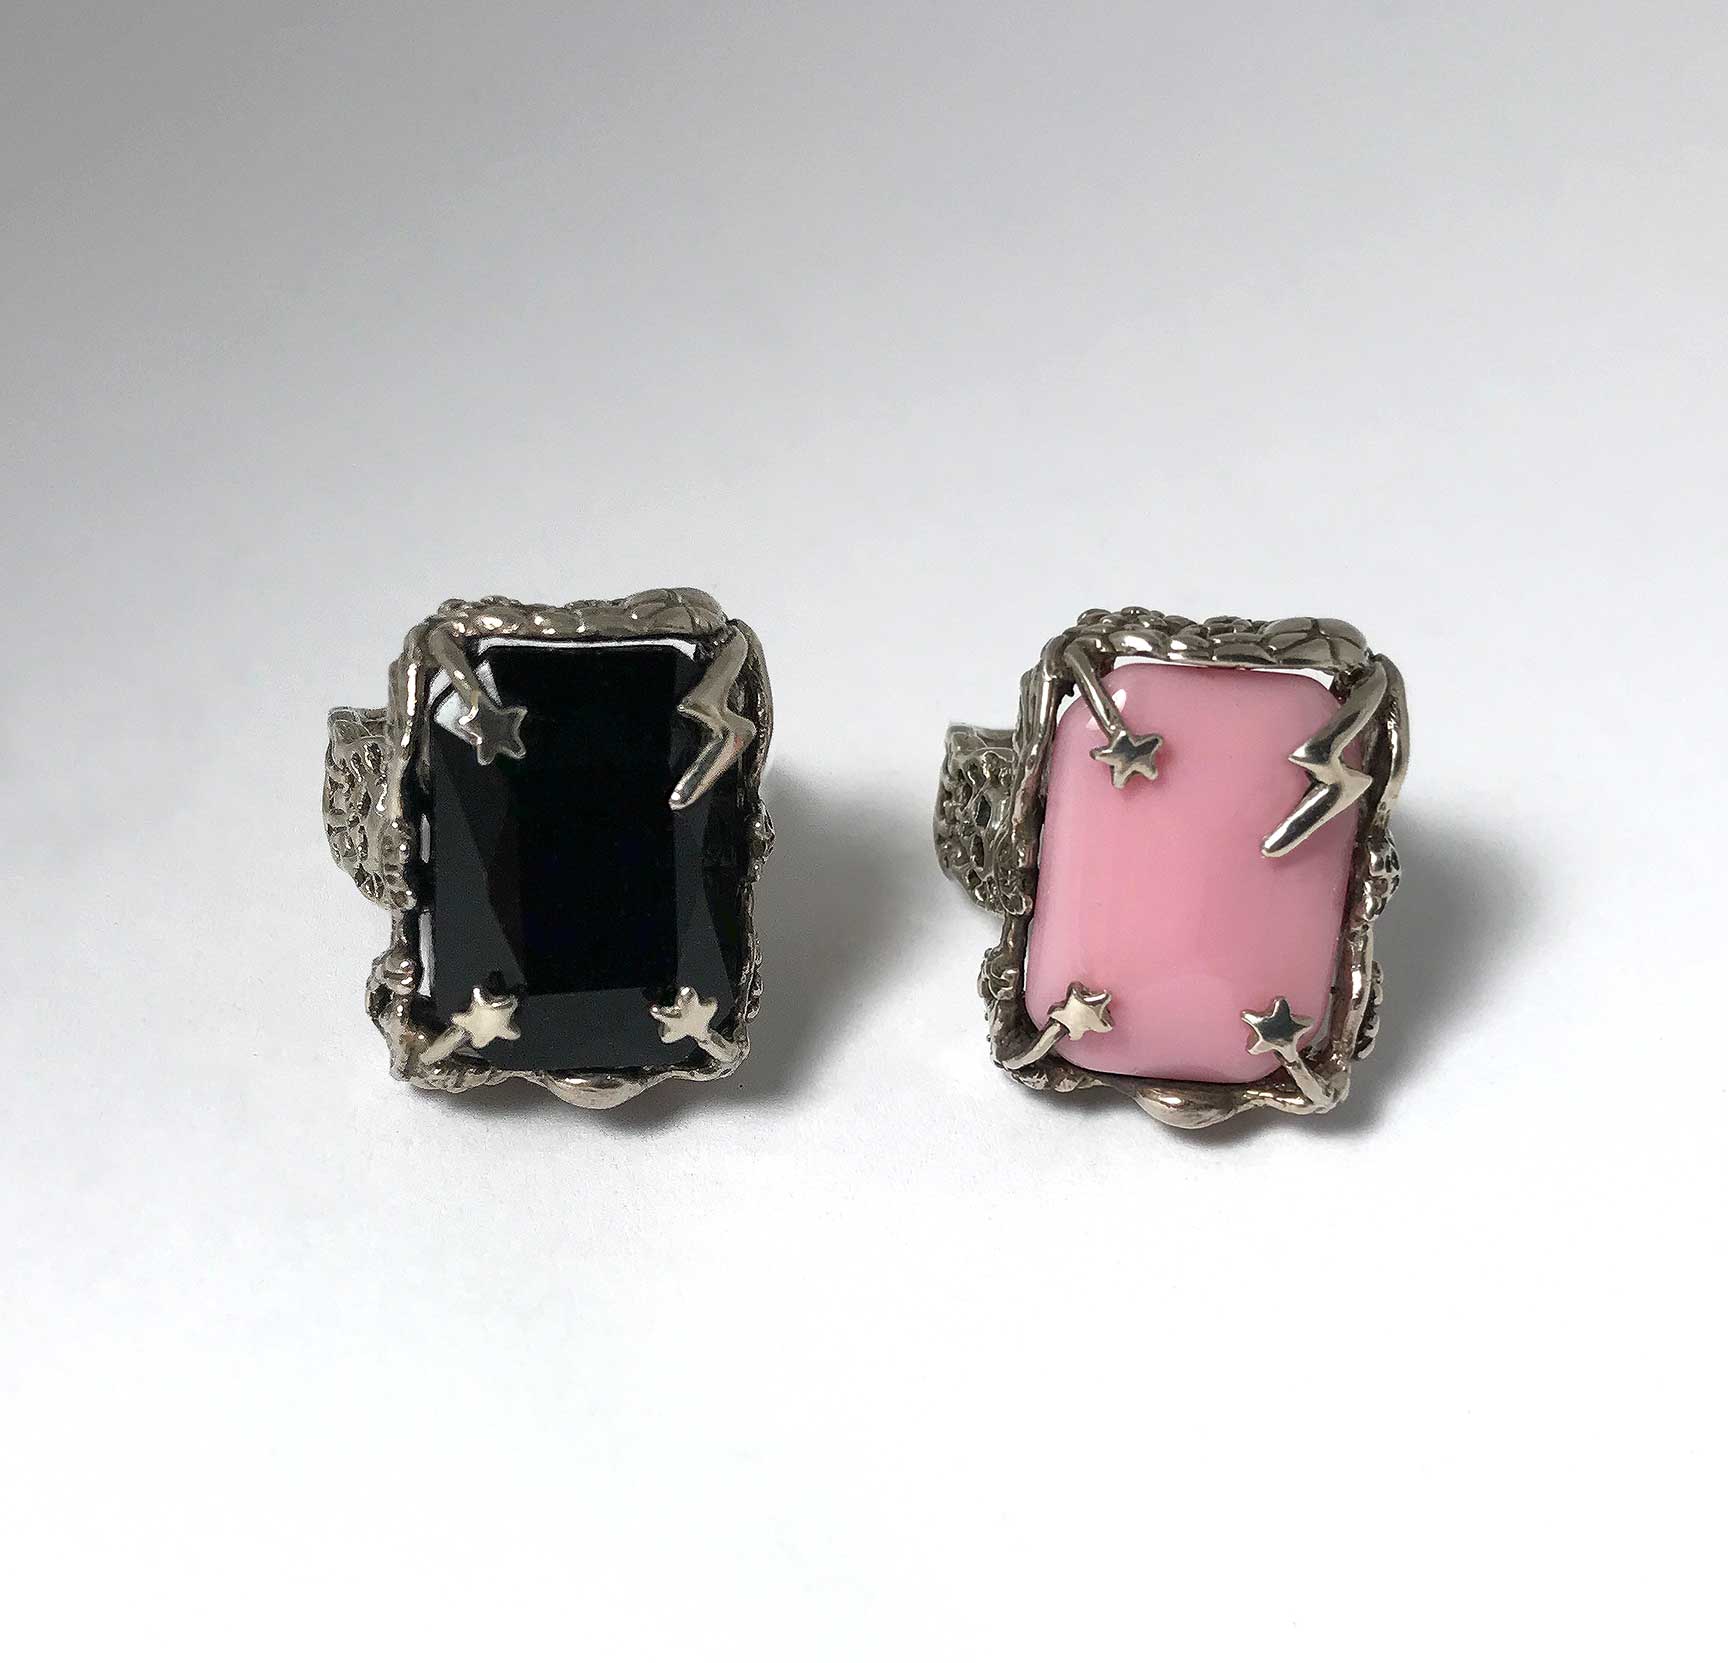 Bowie Ring in Black - Anomaly Jewelry